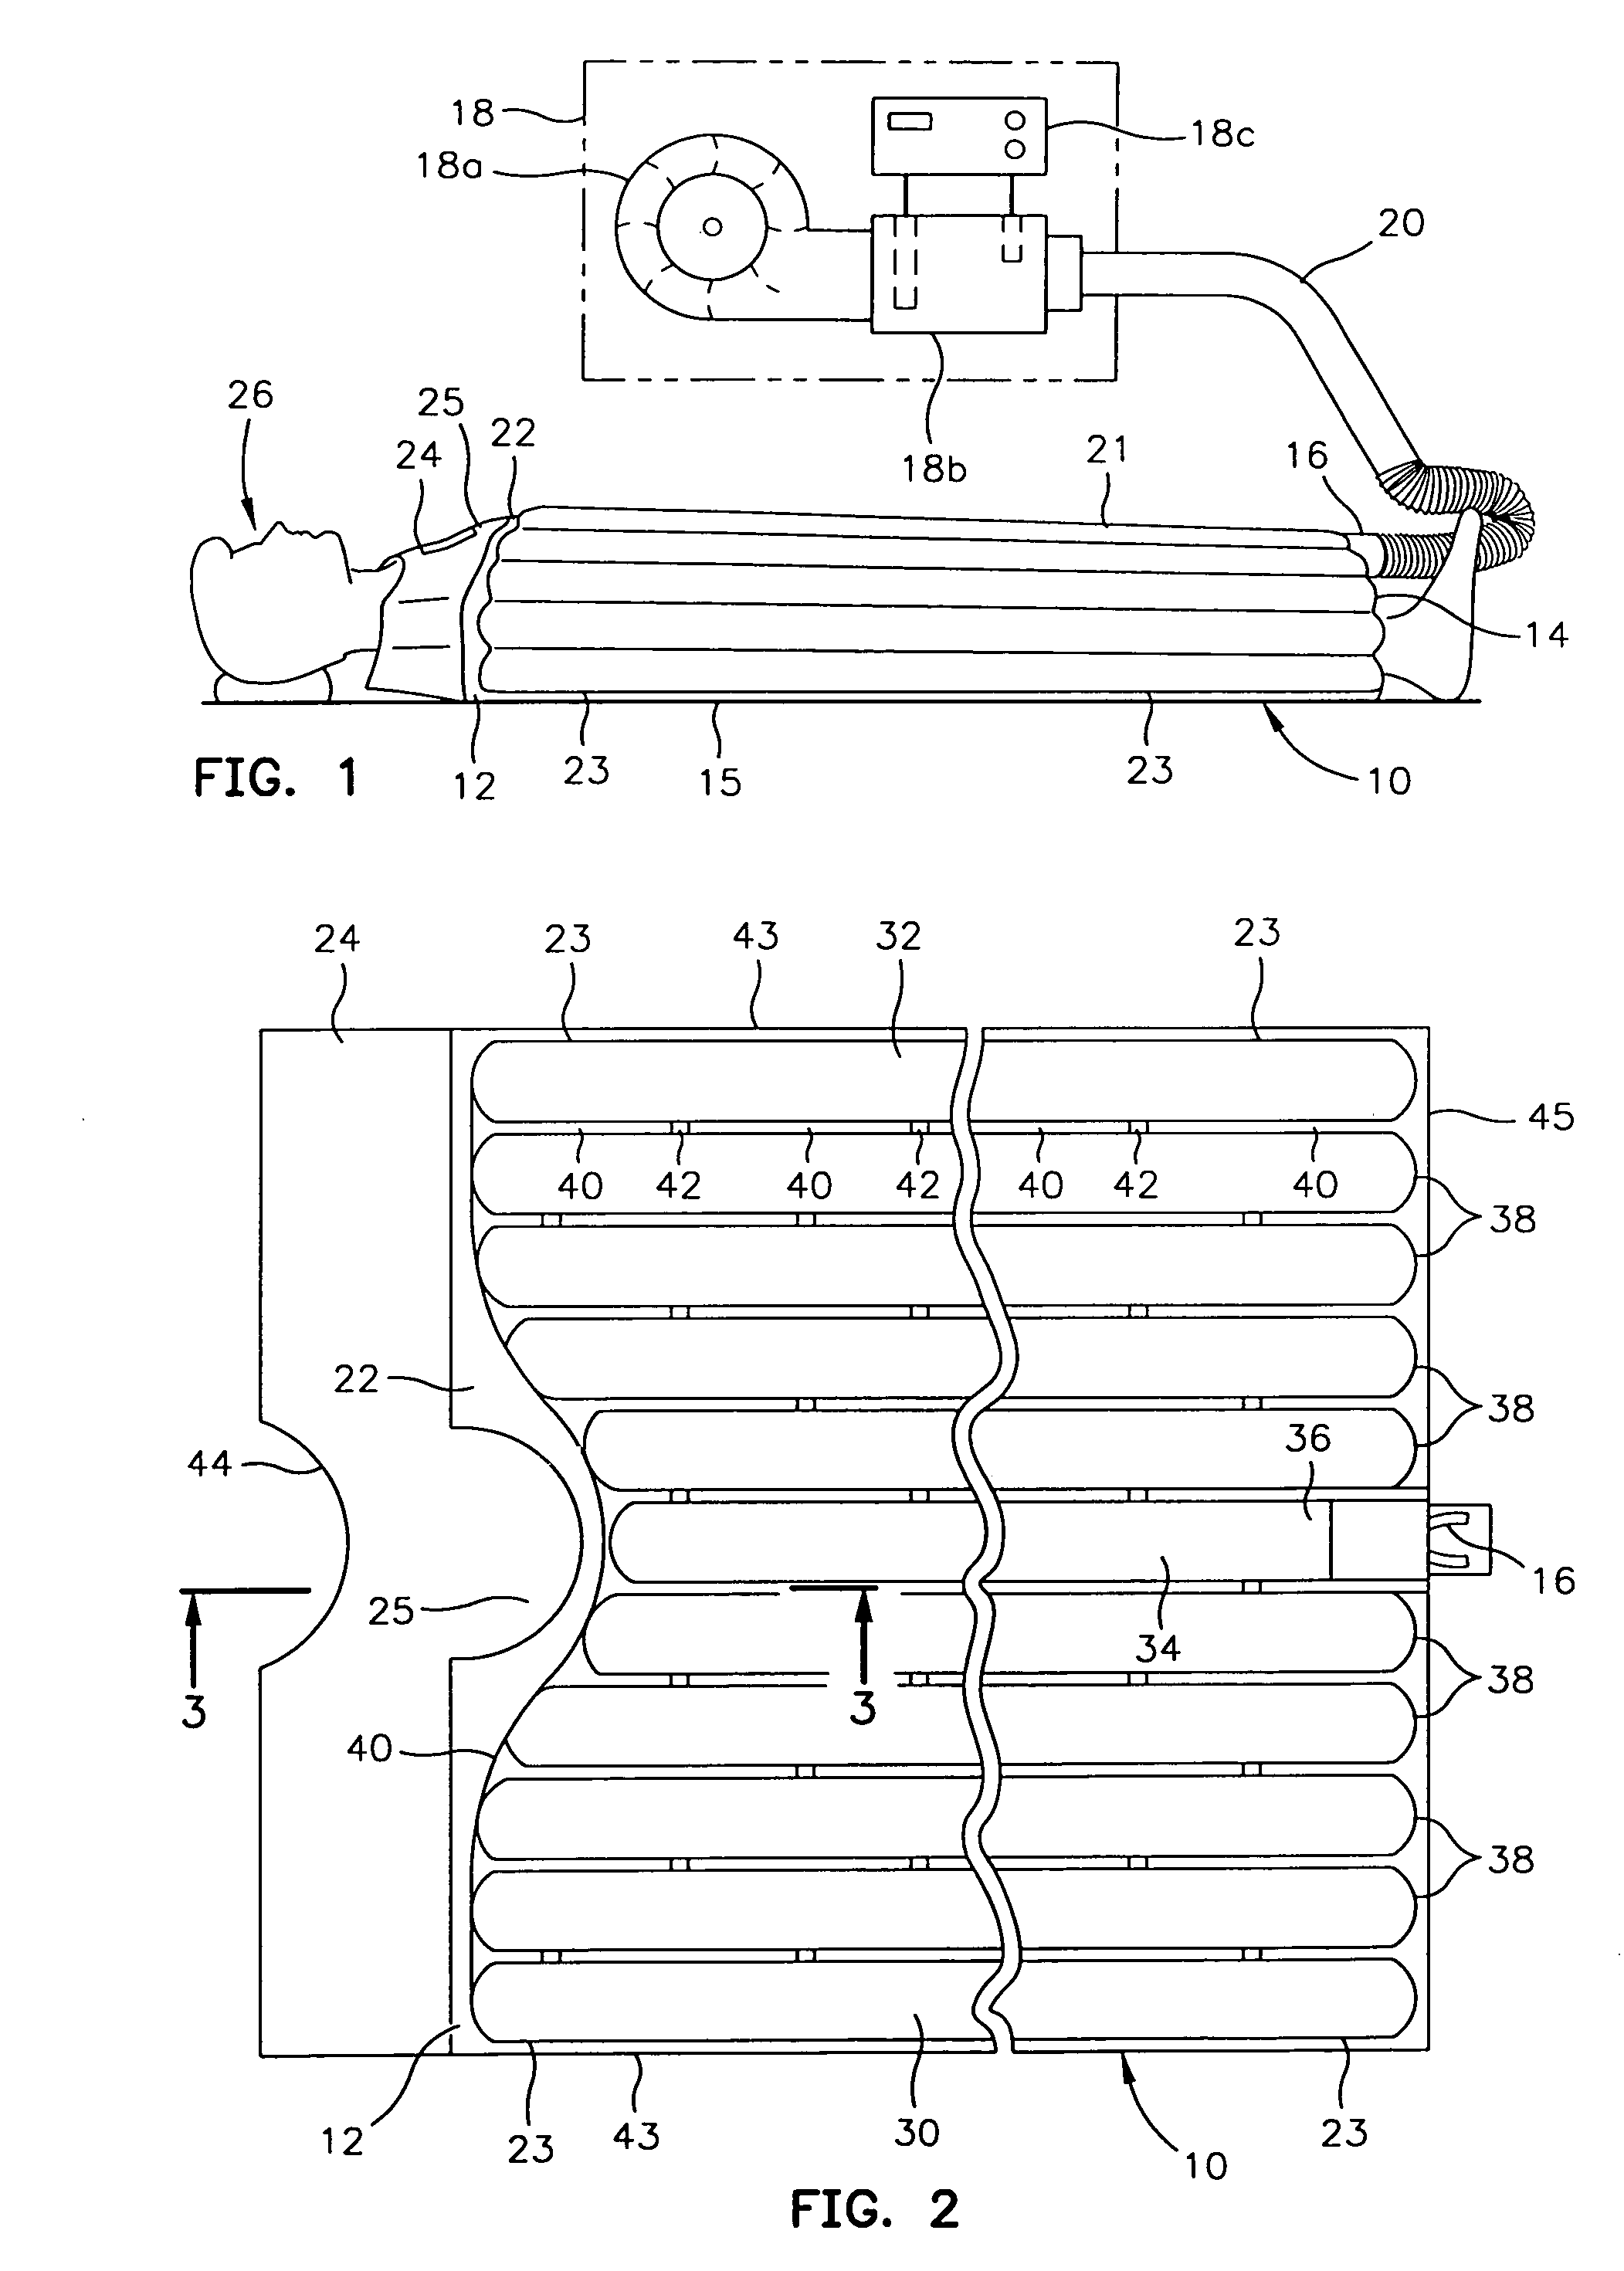 Surgical barrier device incorporating an inflatable thermal blanket with a surgical drape to provide thermal control and surgical access